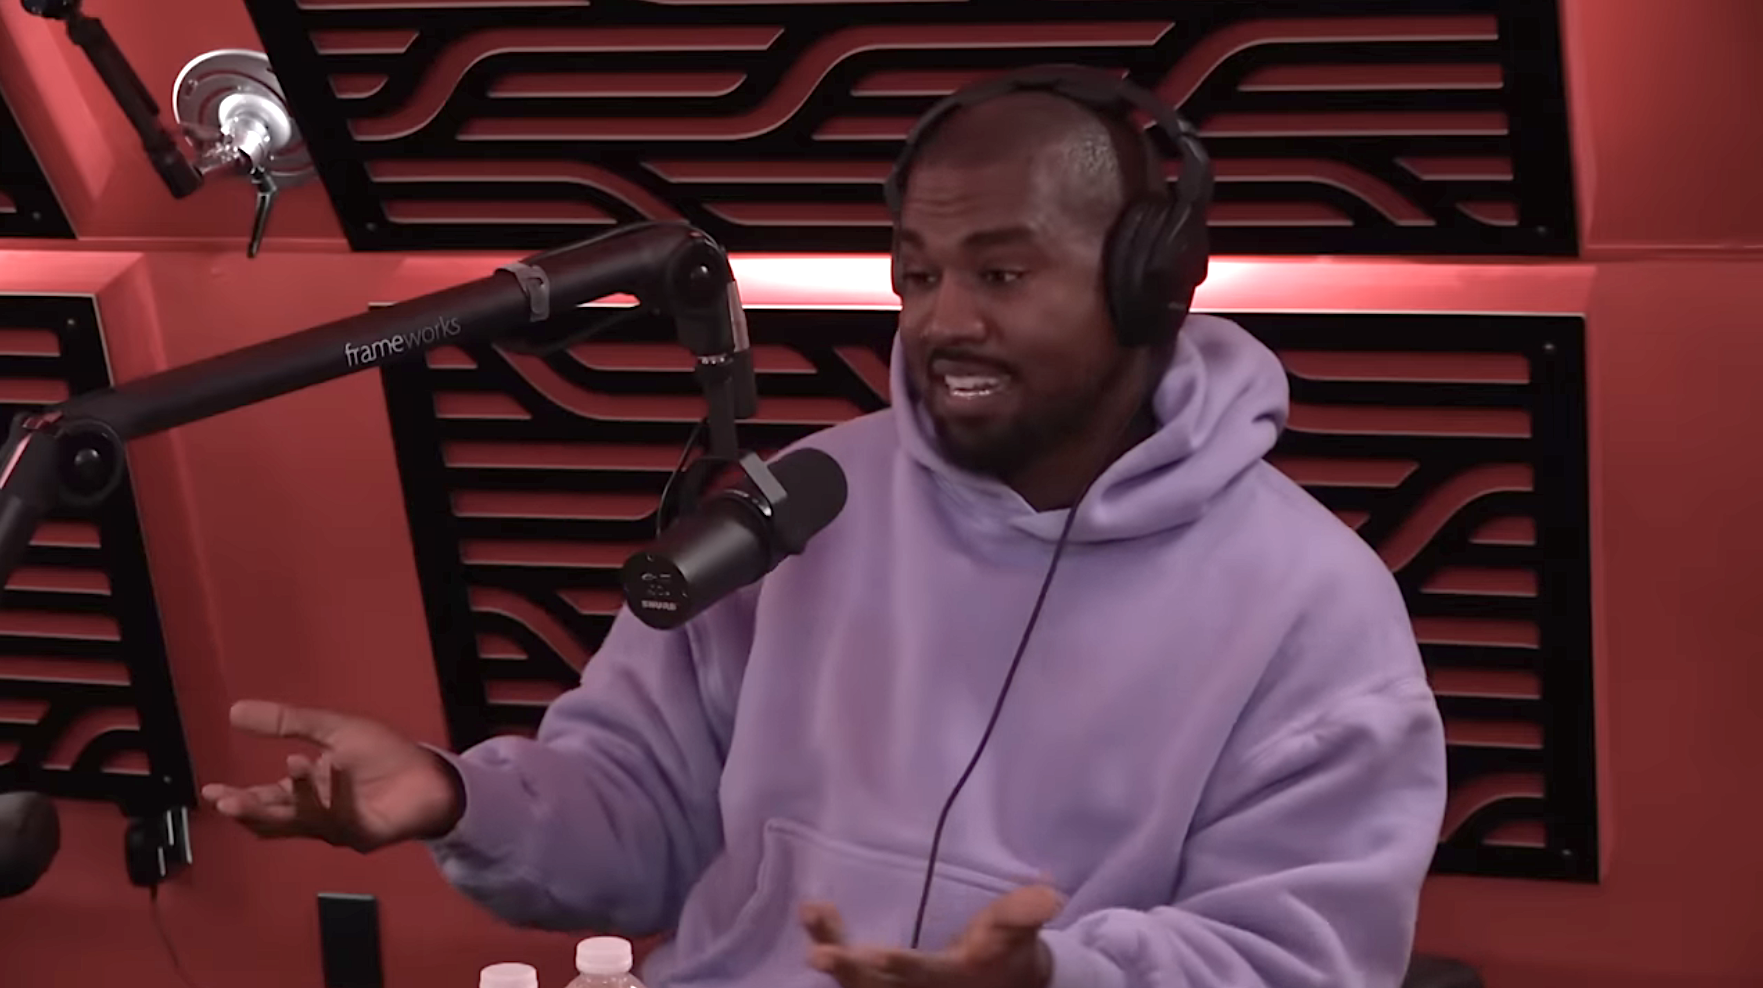 kanye during the podcast interview